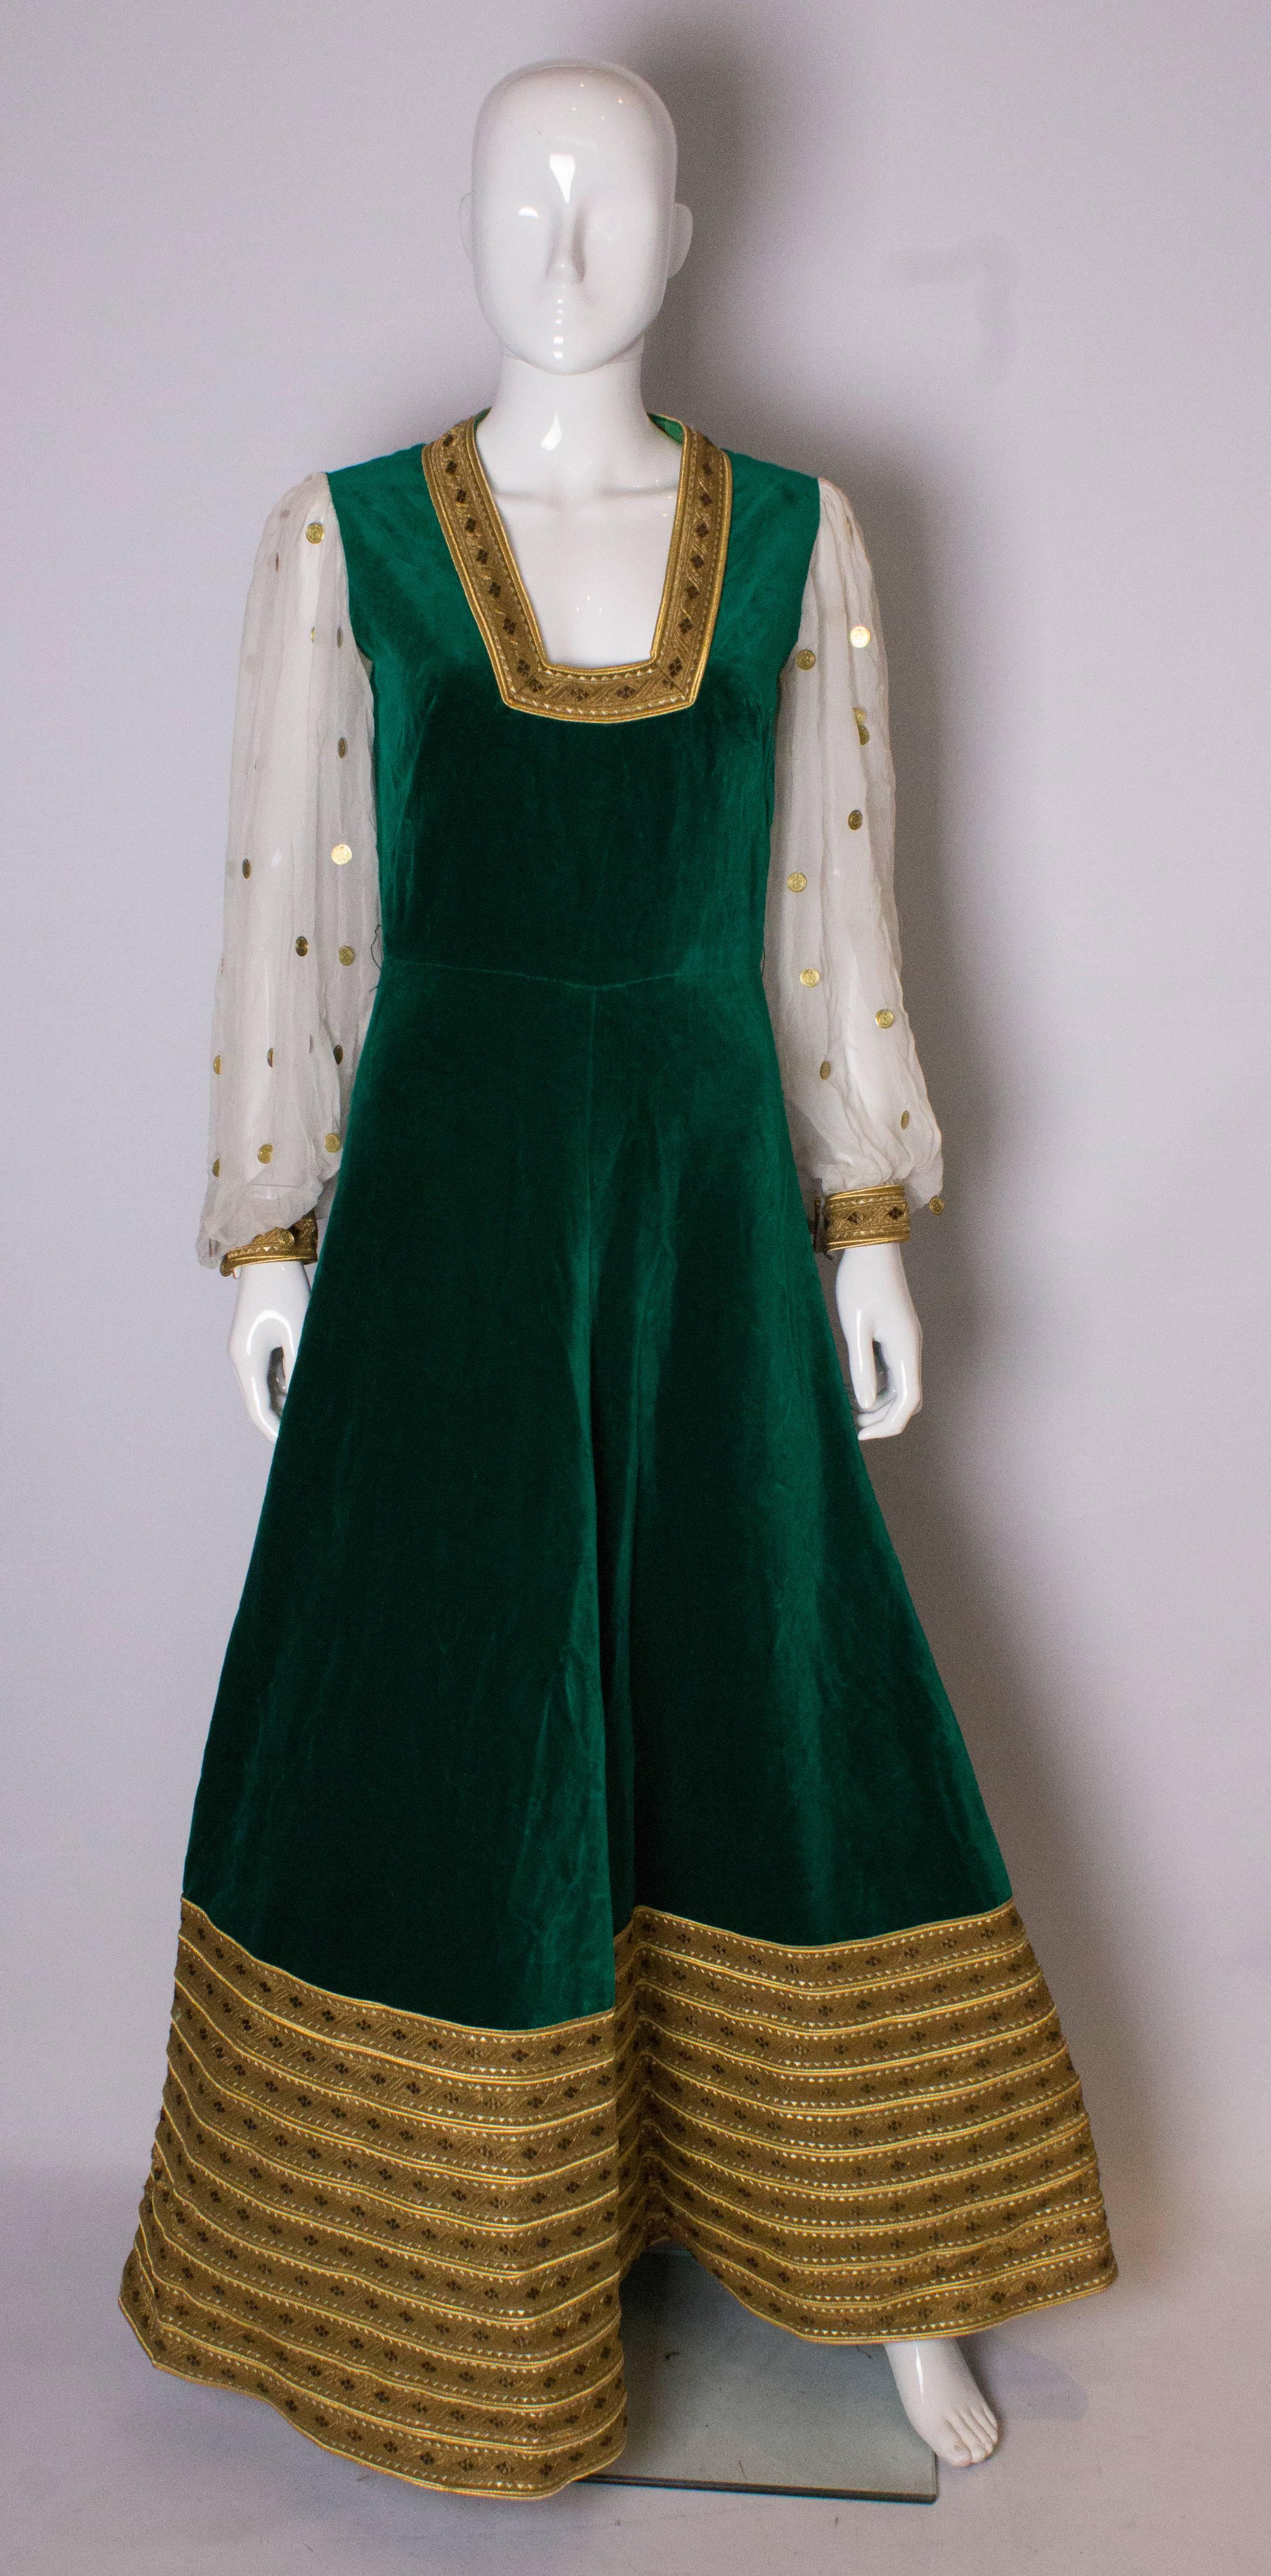 A great gown by Regamus , London . The gown has a boho vibe, in a wonderful green velvet with wide gold trim border at the hem.  The sleeves are chiffon with gold coins attached and have gold cuffs. It is fully lined with a square neckline, anmd